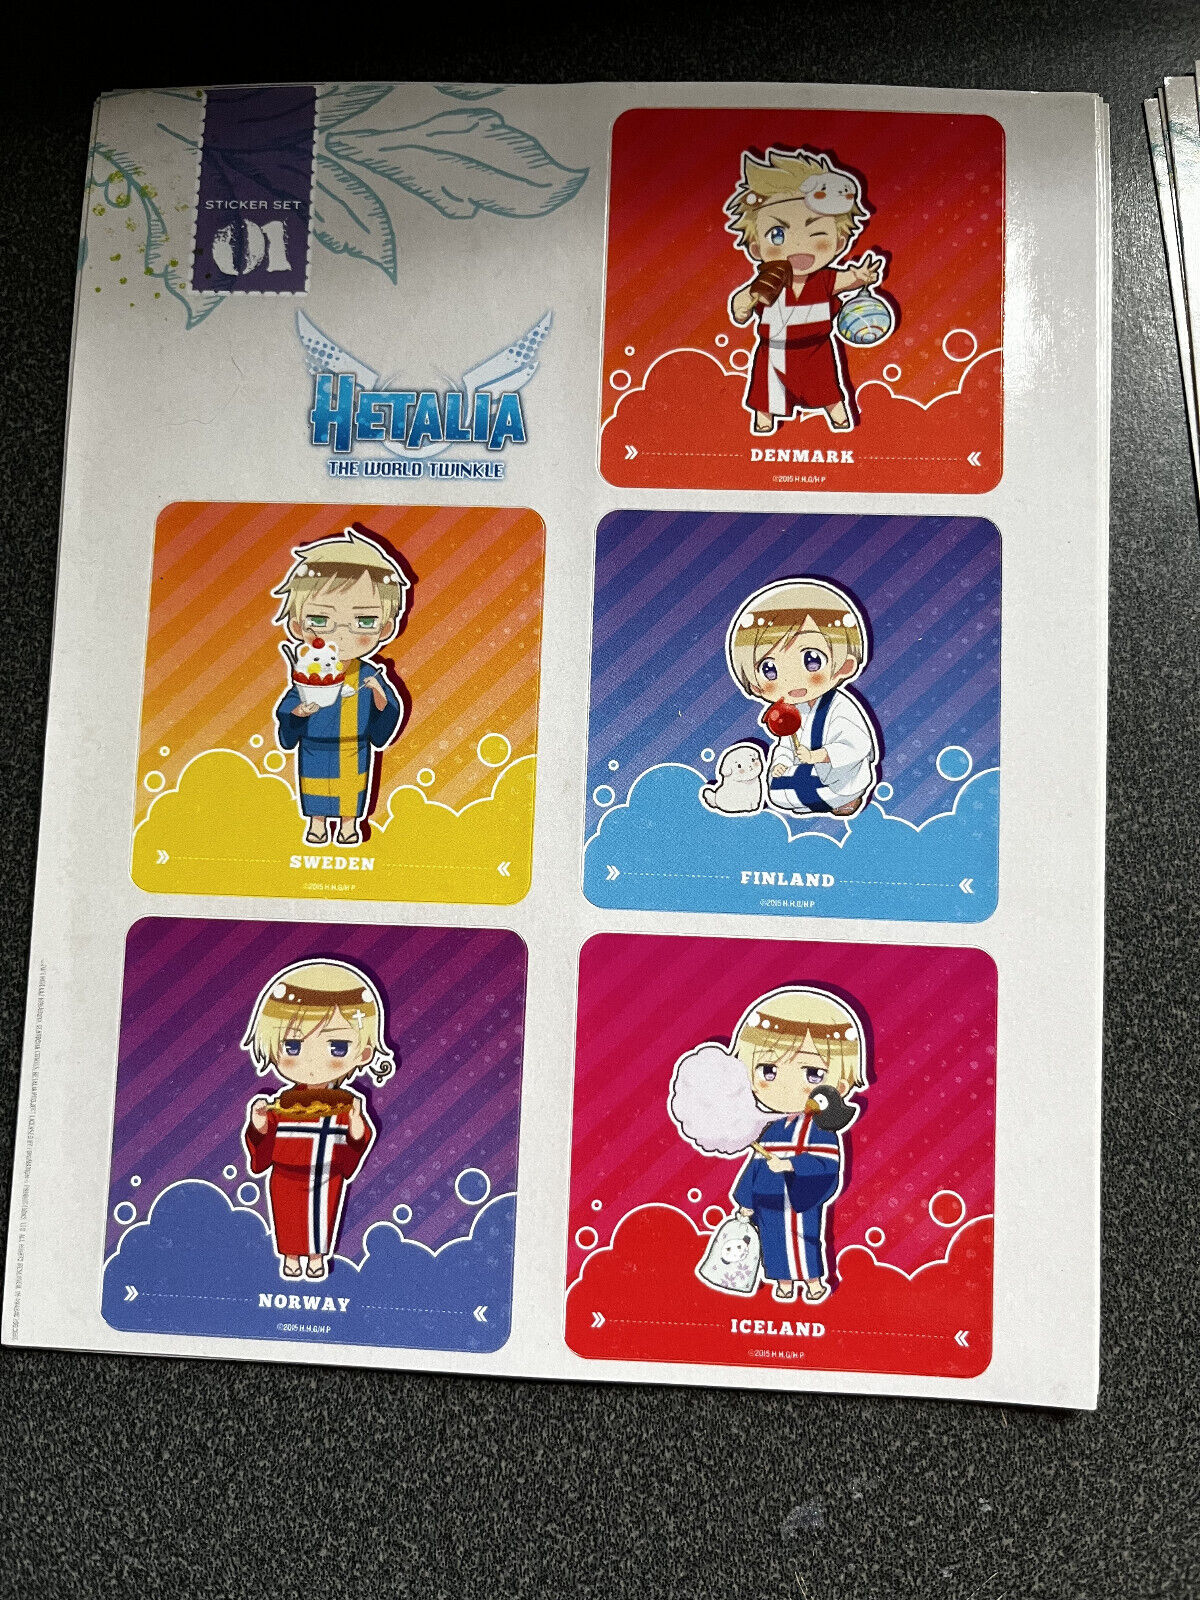 Hetalia: World Twinkle Stickers - Nordics, Axis, Allies [Limited Edition]